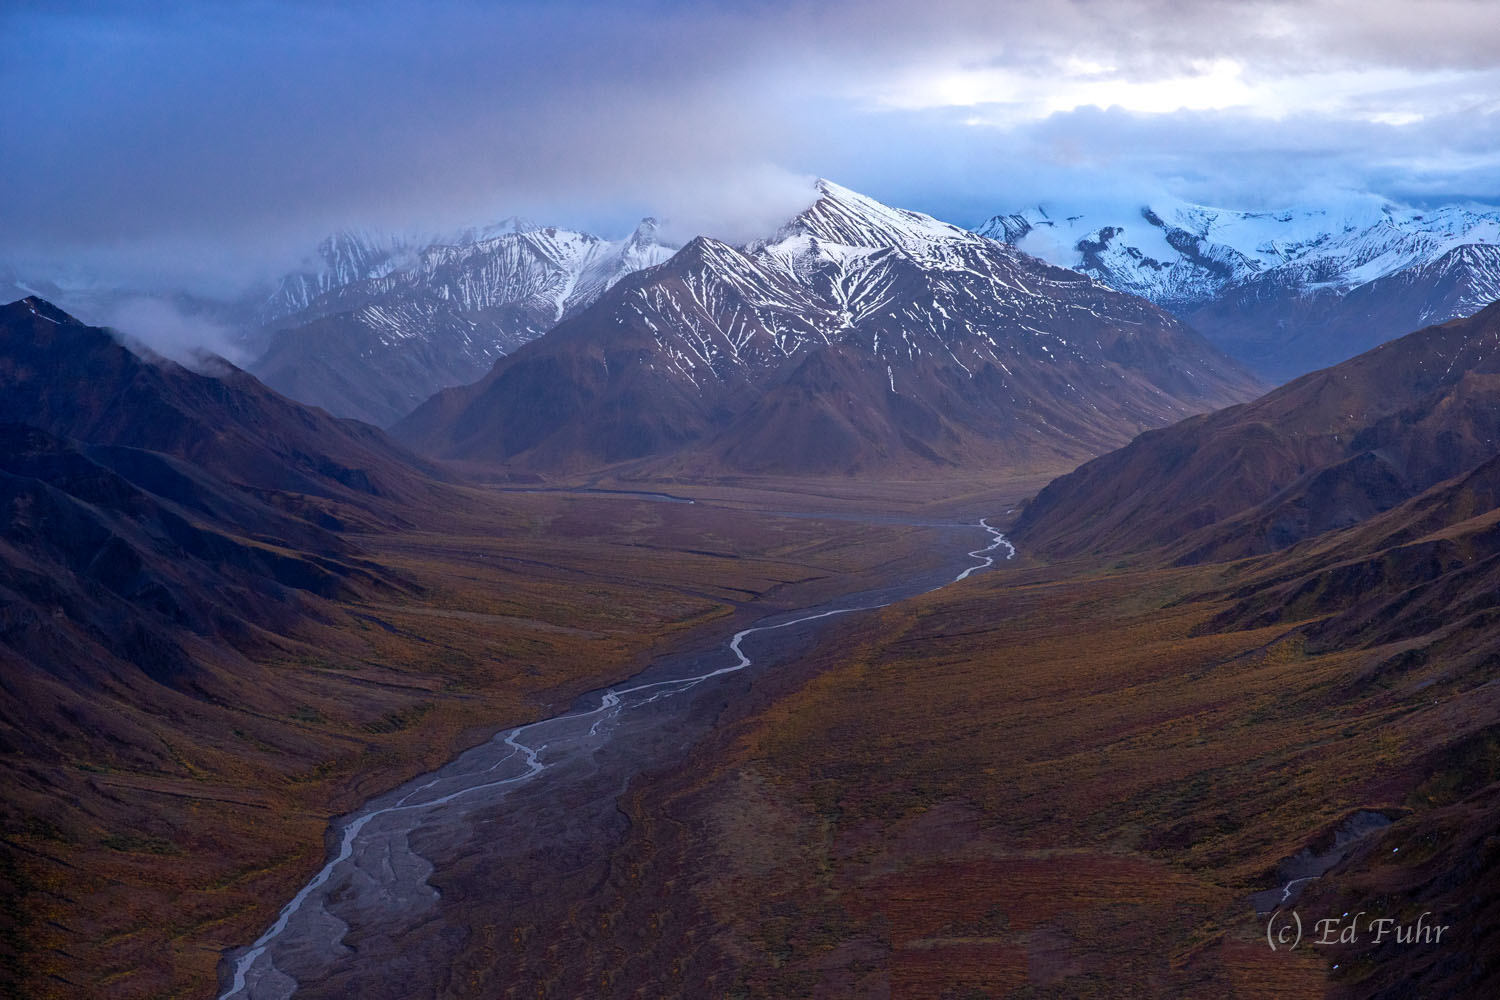 Cathedral Mountain rises in the distance above the draining waters of the Teklanika River.